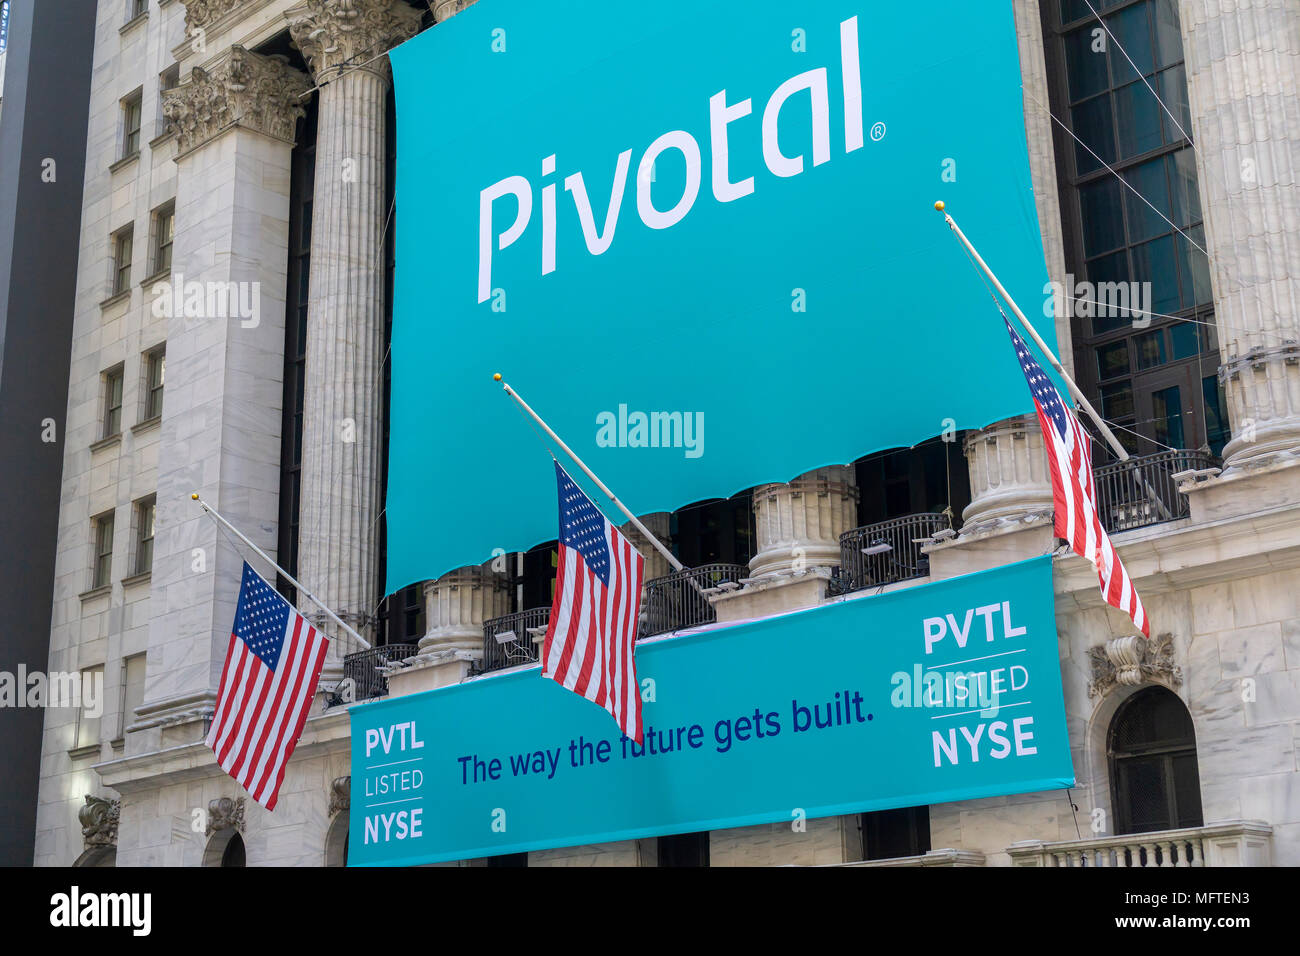 The facade of the New York Stock Exchange is seen on Friday, April 20, 2018 decorated in honor of the debut of trading for Pivotal Software which will trade under PVTL. The company supplies cloud software to build other cloud software and is spun off from EMC and VMware with Dell owning approximately 70% of the stock.  (© Richard B. Levine) Stock Photo